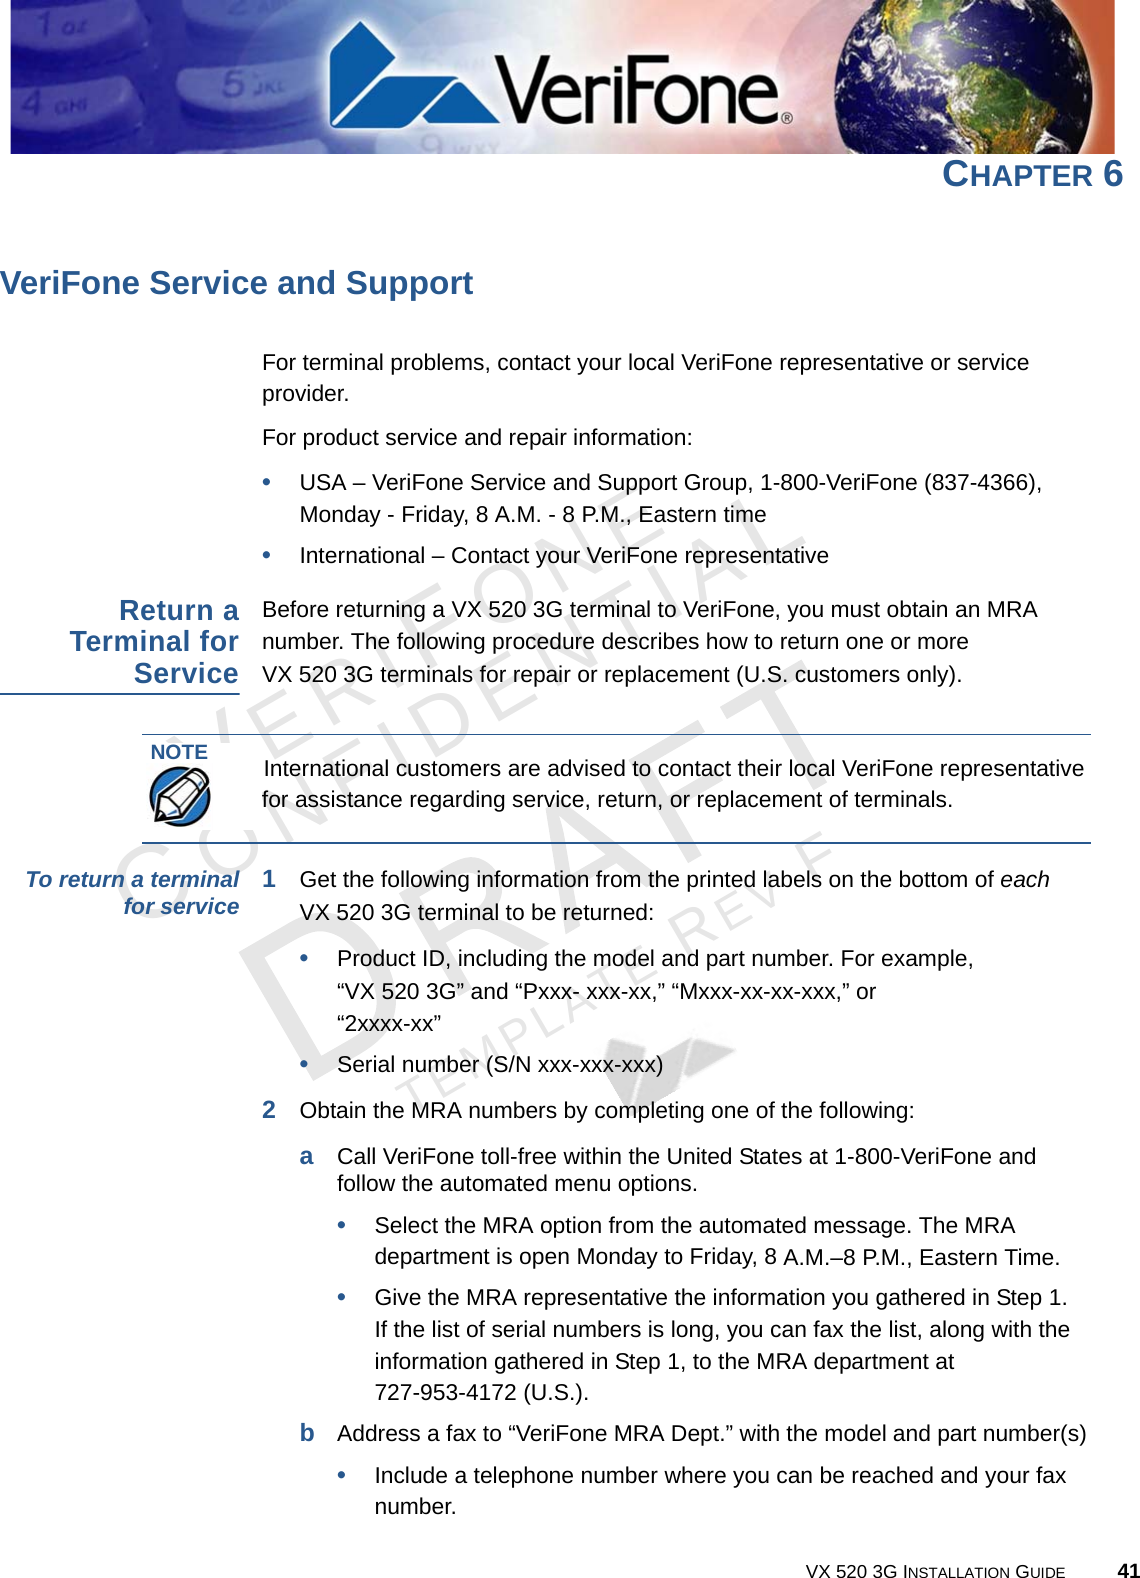 VERIFONECONFIDENTIALTEMPLATE REV F VX 520 3G INSTALLATION GUIDE 41CHAPTER 6 VeriFone Service and SupportFor terminal problems, contact your local VeriFone representative or service provider. For product service and repair information:•USA – VeriFone Service and Support Group, 1-800-VeriFone (837-4366),  Monday - Friday, 8 A.M. - 8 P.M., Eastern time•International – Contact your VeriFone representative Return a Terminal for ServiceBefore returning a VX 520 3G terminal to VeriFone, you must obtain an MRA number. The following procedure describes how to return one or more  VX 520 3G terminals for repair or replacement (U.S. customers only). To return a terminal for service 1Get the following information from the printed labels on the bottom of each  VX 520 3G terminal to be returned:•Product ID, including the model and part number. For example,  “VX 520 3G” and “Pxxx- xxx-xx,” “Mxxx-xx-xx-xxx,” or  “2xxxx-xx”•Serial number (S/N xxx-xxx-xxx)2Obtain the MRA numbers by completing one of the following:aCall VeriFone toll-free within the United States at 1-800-VeriFone and follow the automated menu options.•Select the MRA option from the automated message. The MRA department is open Monday to Friday, 8 A.M.–8 P.M., Eastern Time.•Give the MRA representative the information you gathered in Step 1. If the list of serial numbers is long, you can fax the list, along with the information gathered in Step 1, to the MRA department at  727-953-4172 (U.S.).bAddress a fax to “VeriFone MRA Dept.” with the model and part number(s)•Include a telephone number where you can be reached and your fax number.NOTEInternational customers are advised to contact their local VeriFone representative for assistance regarding service, return, or replacement of terminals.